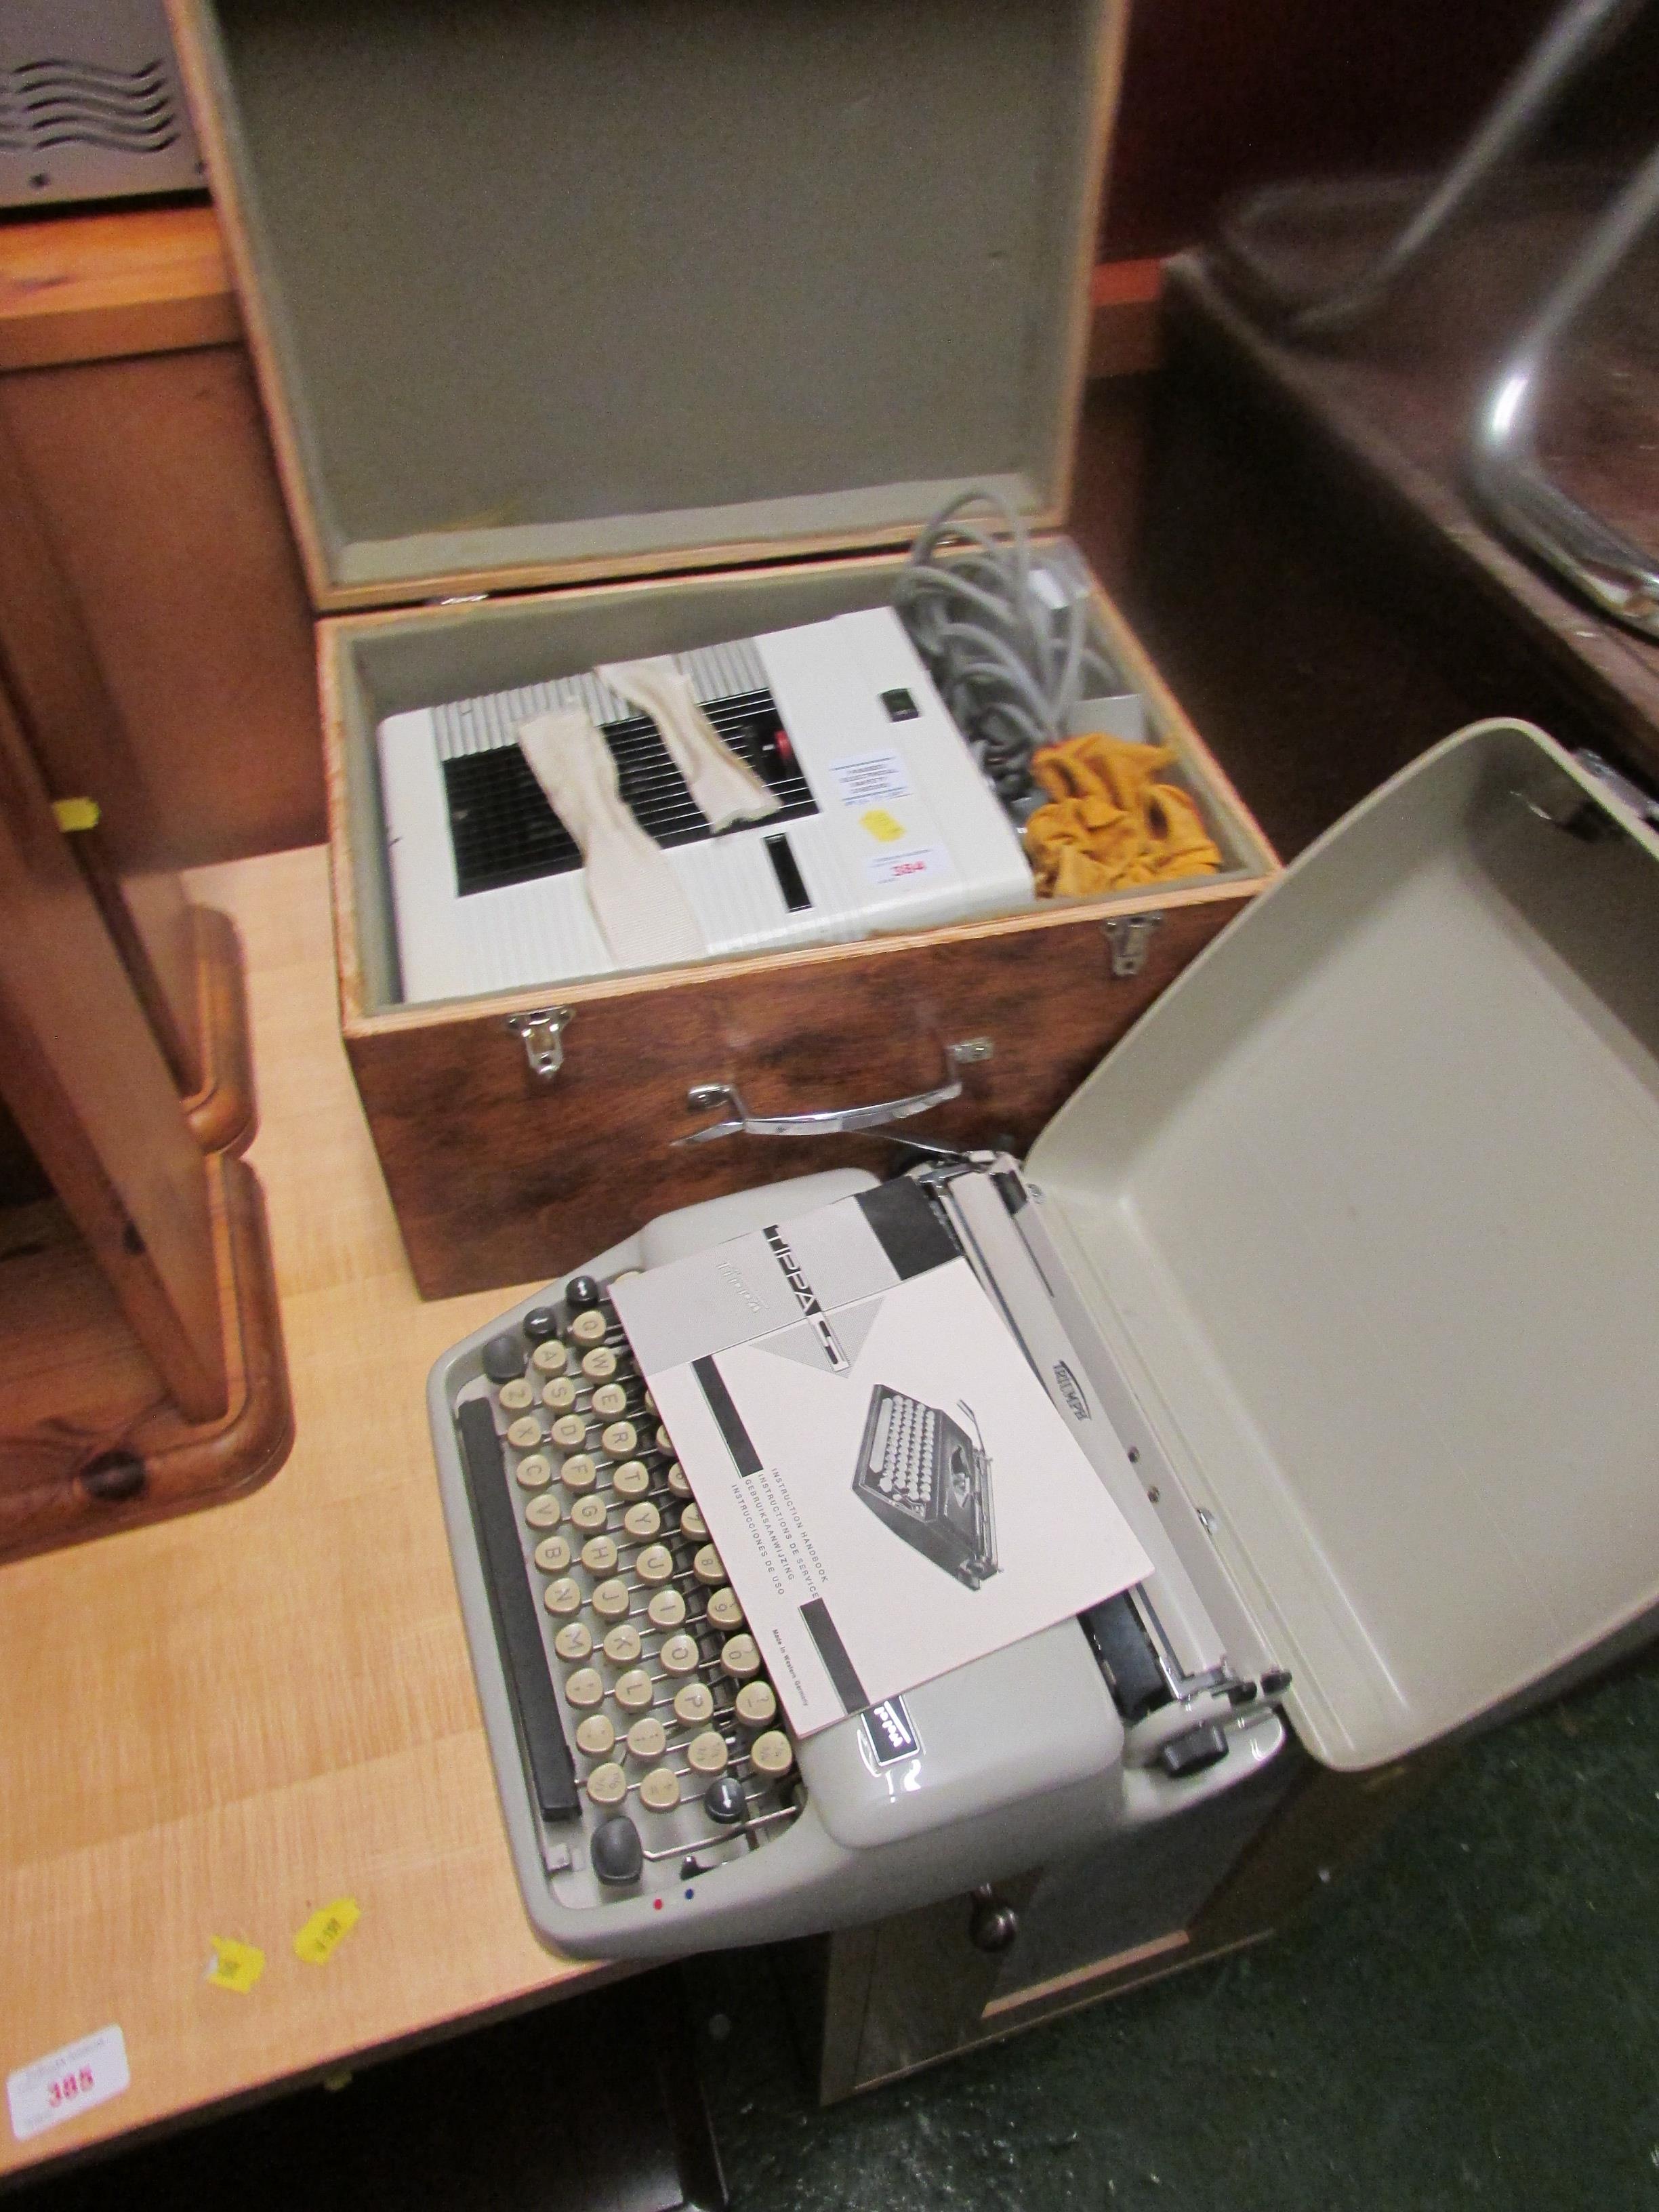 BRAUN SLIDE PROJECTOR IN CARRY CASE (NEEDS A PLUG) TOGETHER WITH A TIPPA S TYPEWRITER